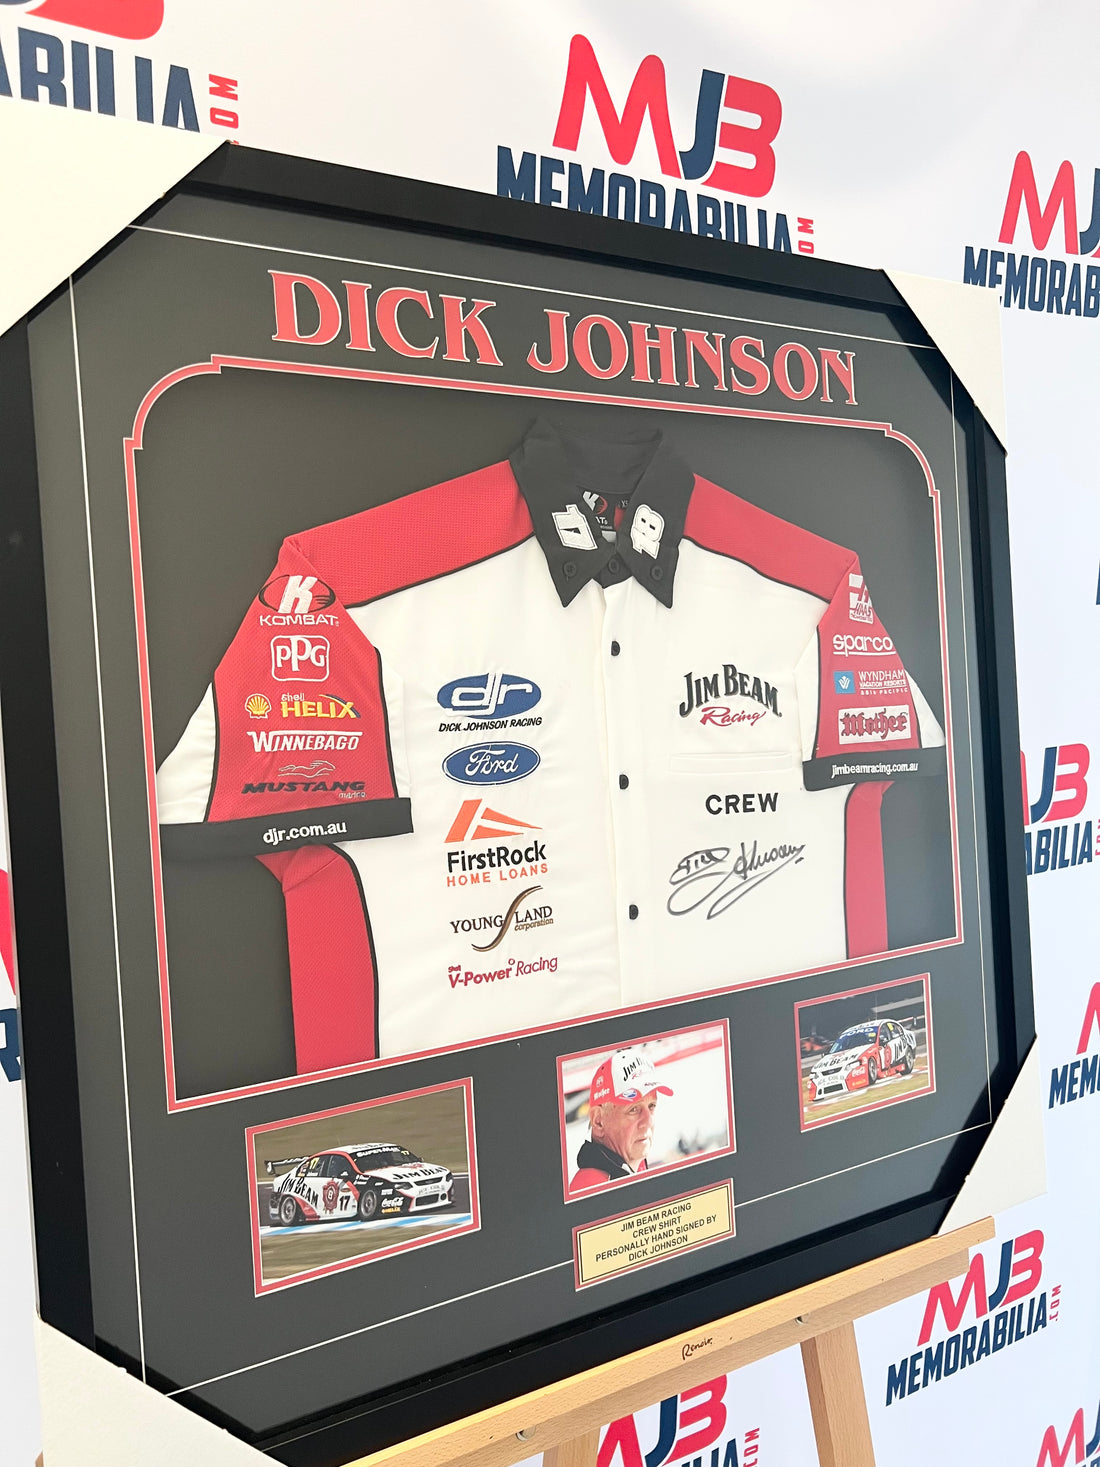 A Legendary Addition: Dick Johnson Signed Autograph Crew Shirt Joins MJB Memorabilia Collection